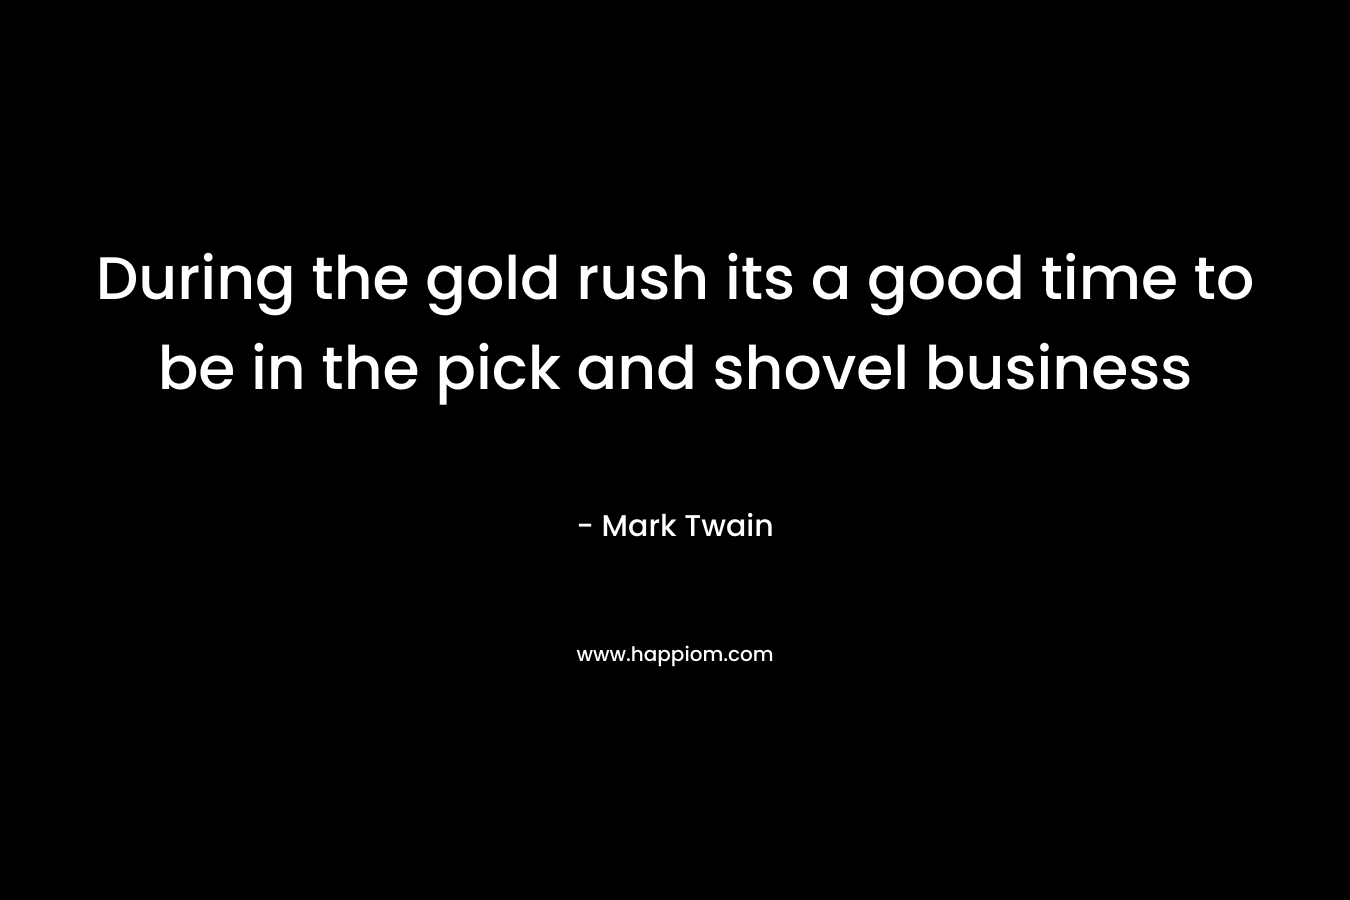 During the gold rush its a good time to be in the pick and shovel business – Mark Twain